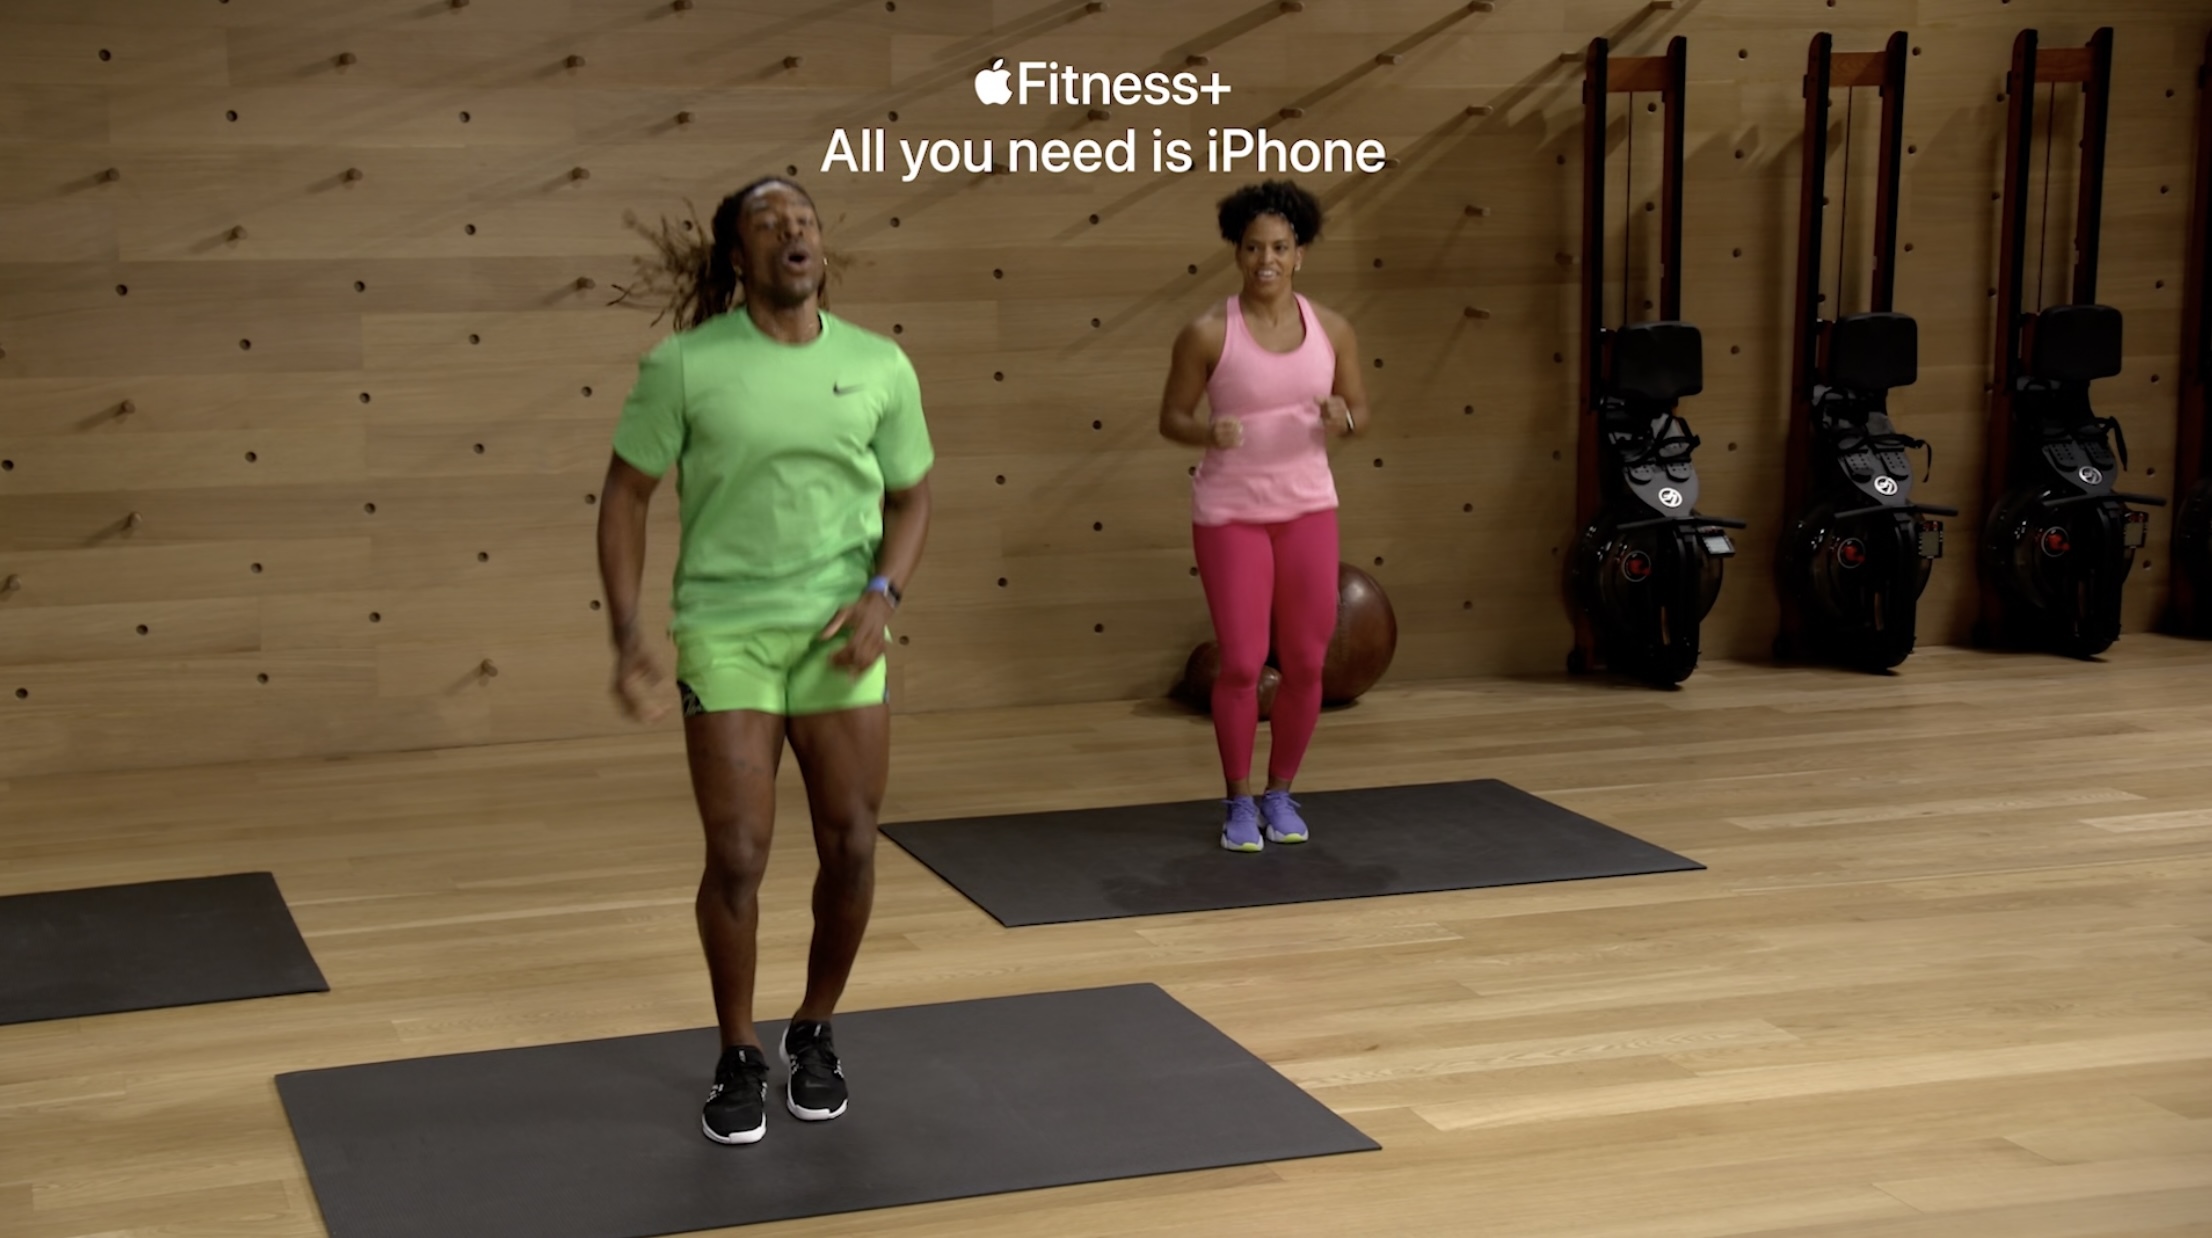 Apple Fitness+ to Become Available to All iPhone Users, No Apple Watch Required